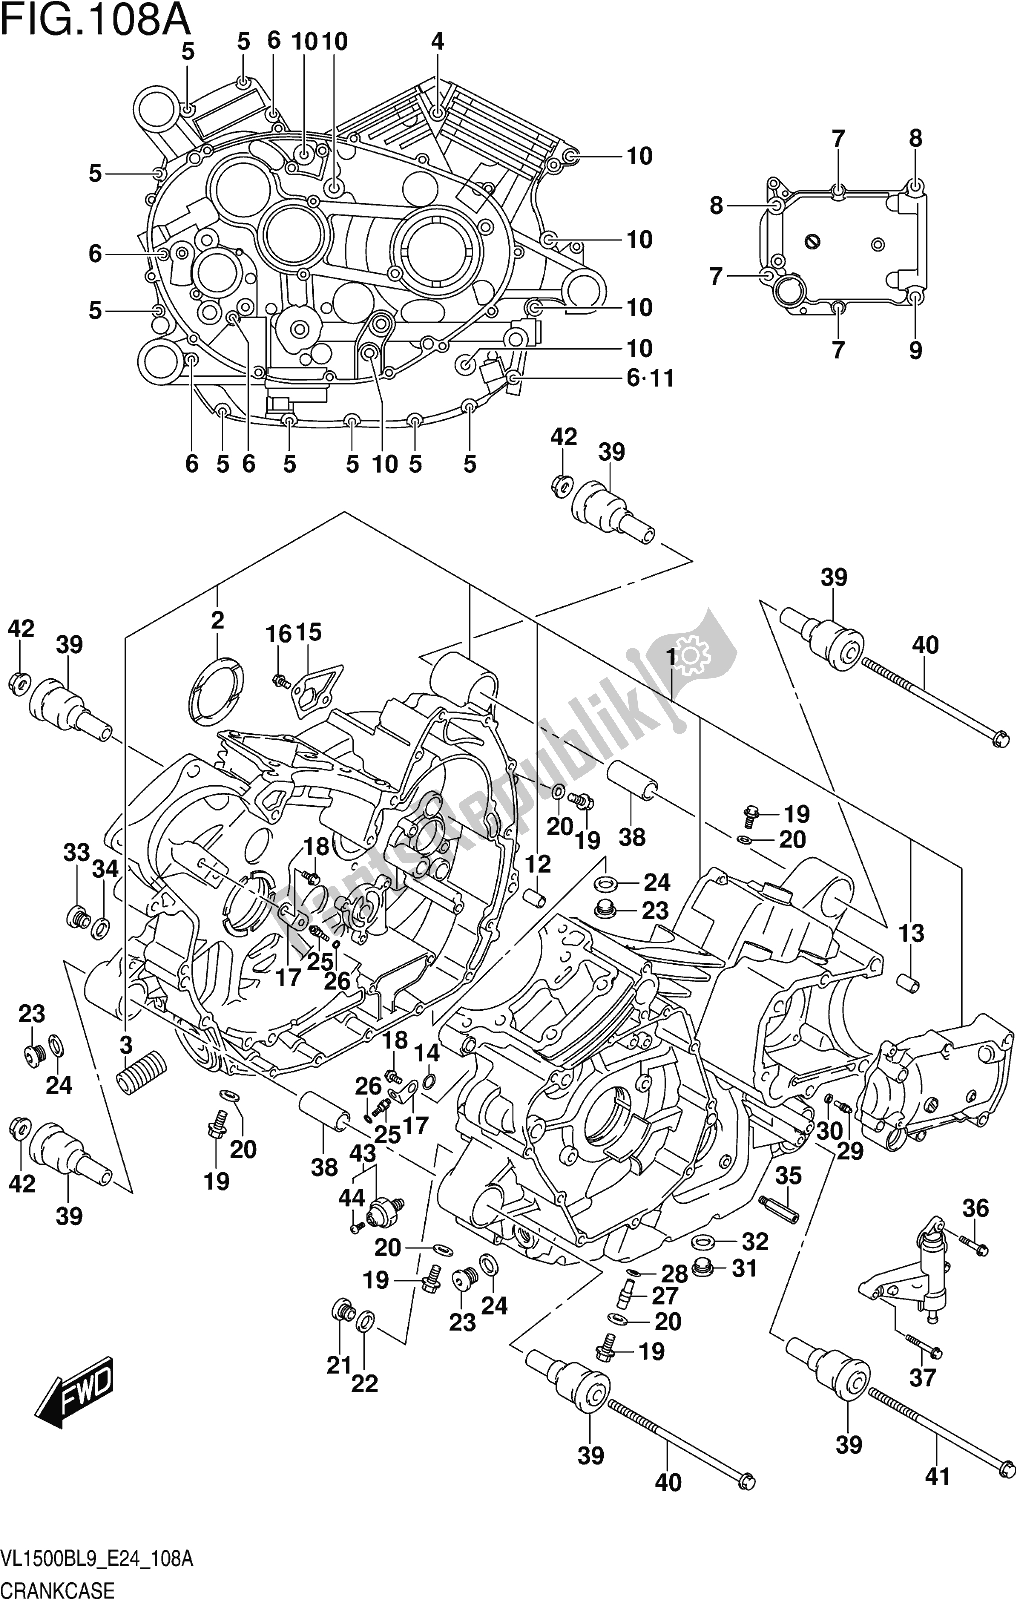 All parts for the Fig. 108a Crankcase of the Suzuki VL 1500B 2019